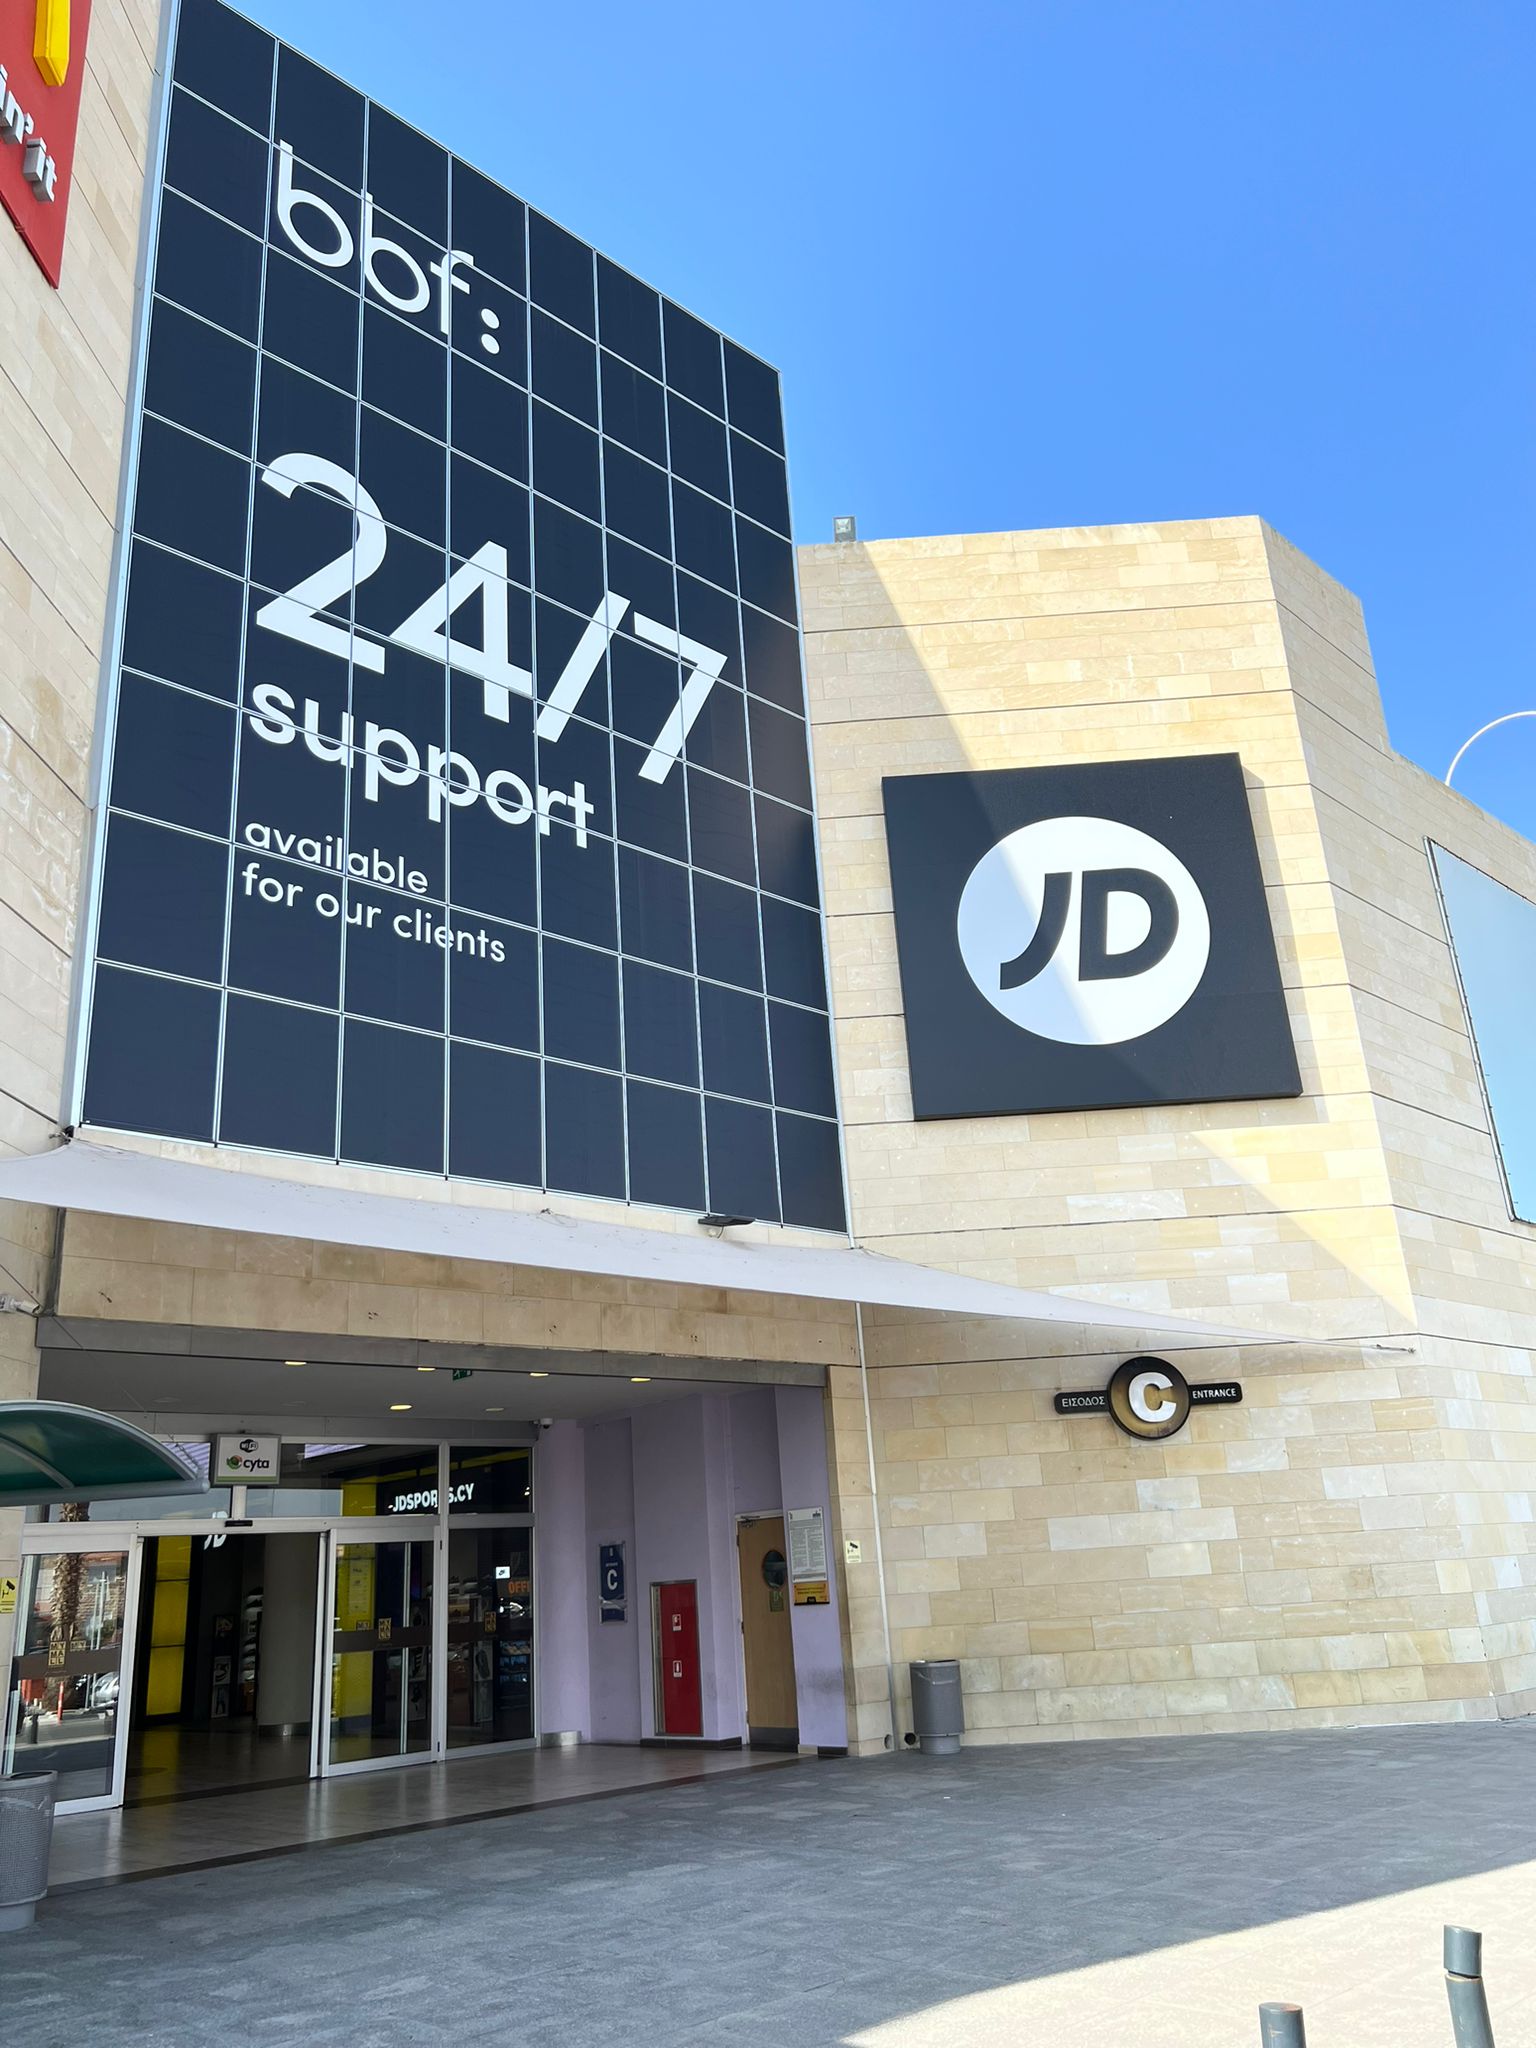 outside of the jd sports shop in limassol